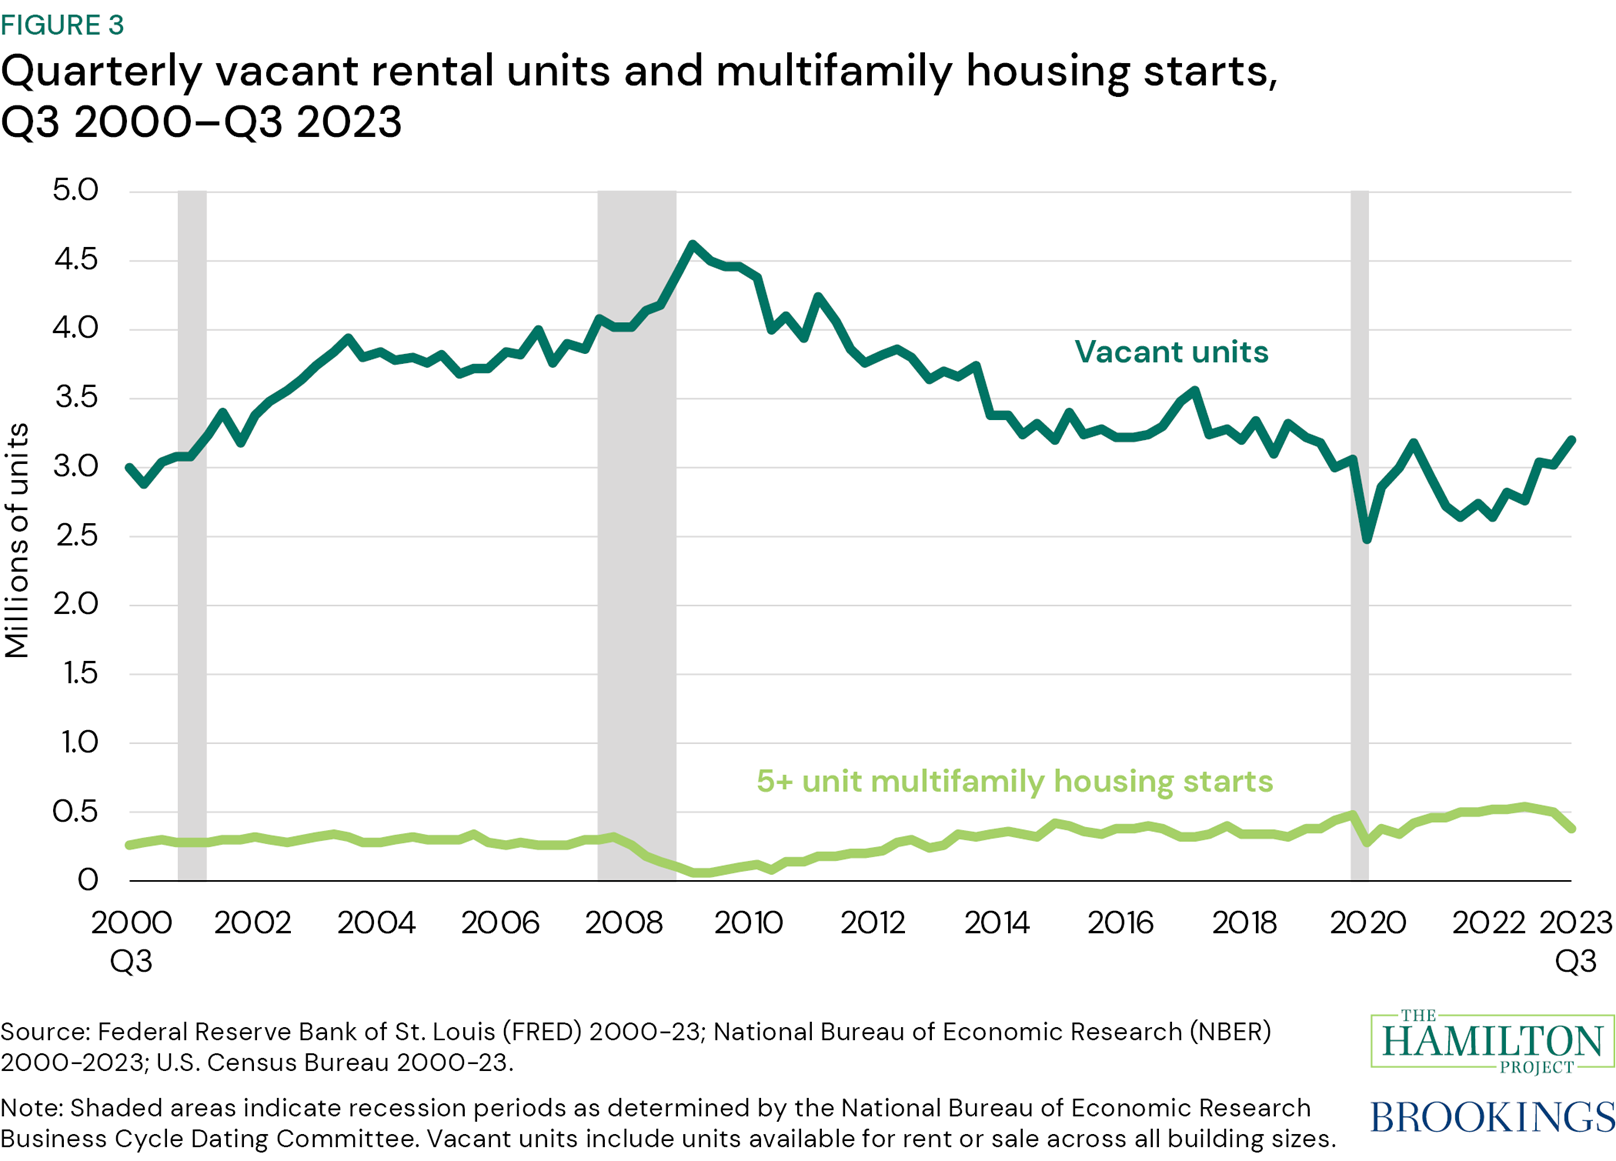 Figure 3: Quarterly vacant rental units and multifamily housing starts, Q3 2000–Q3 2023. Figure 3 shows both the number of multifamily housing starts (i.e., initiation of construction) for properties with five or more units and rental vacancies (i.e., the share of units available for rent without a tenant) from the third quarter of 2000 to the third quarter of 2023. As one might expect, these two indicators generally move in opposite directions: As the number of vacant rental units falls, the number of multifamily unit starts increases.